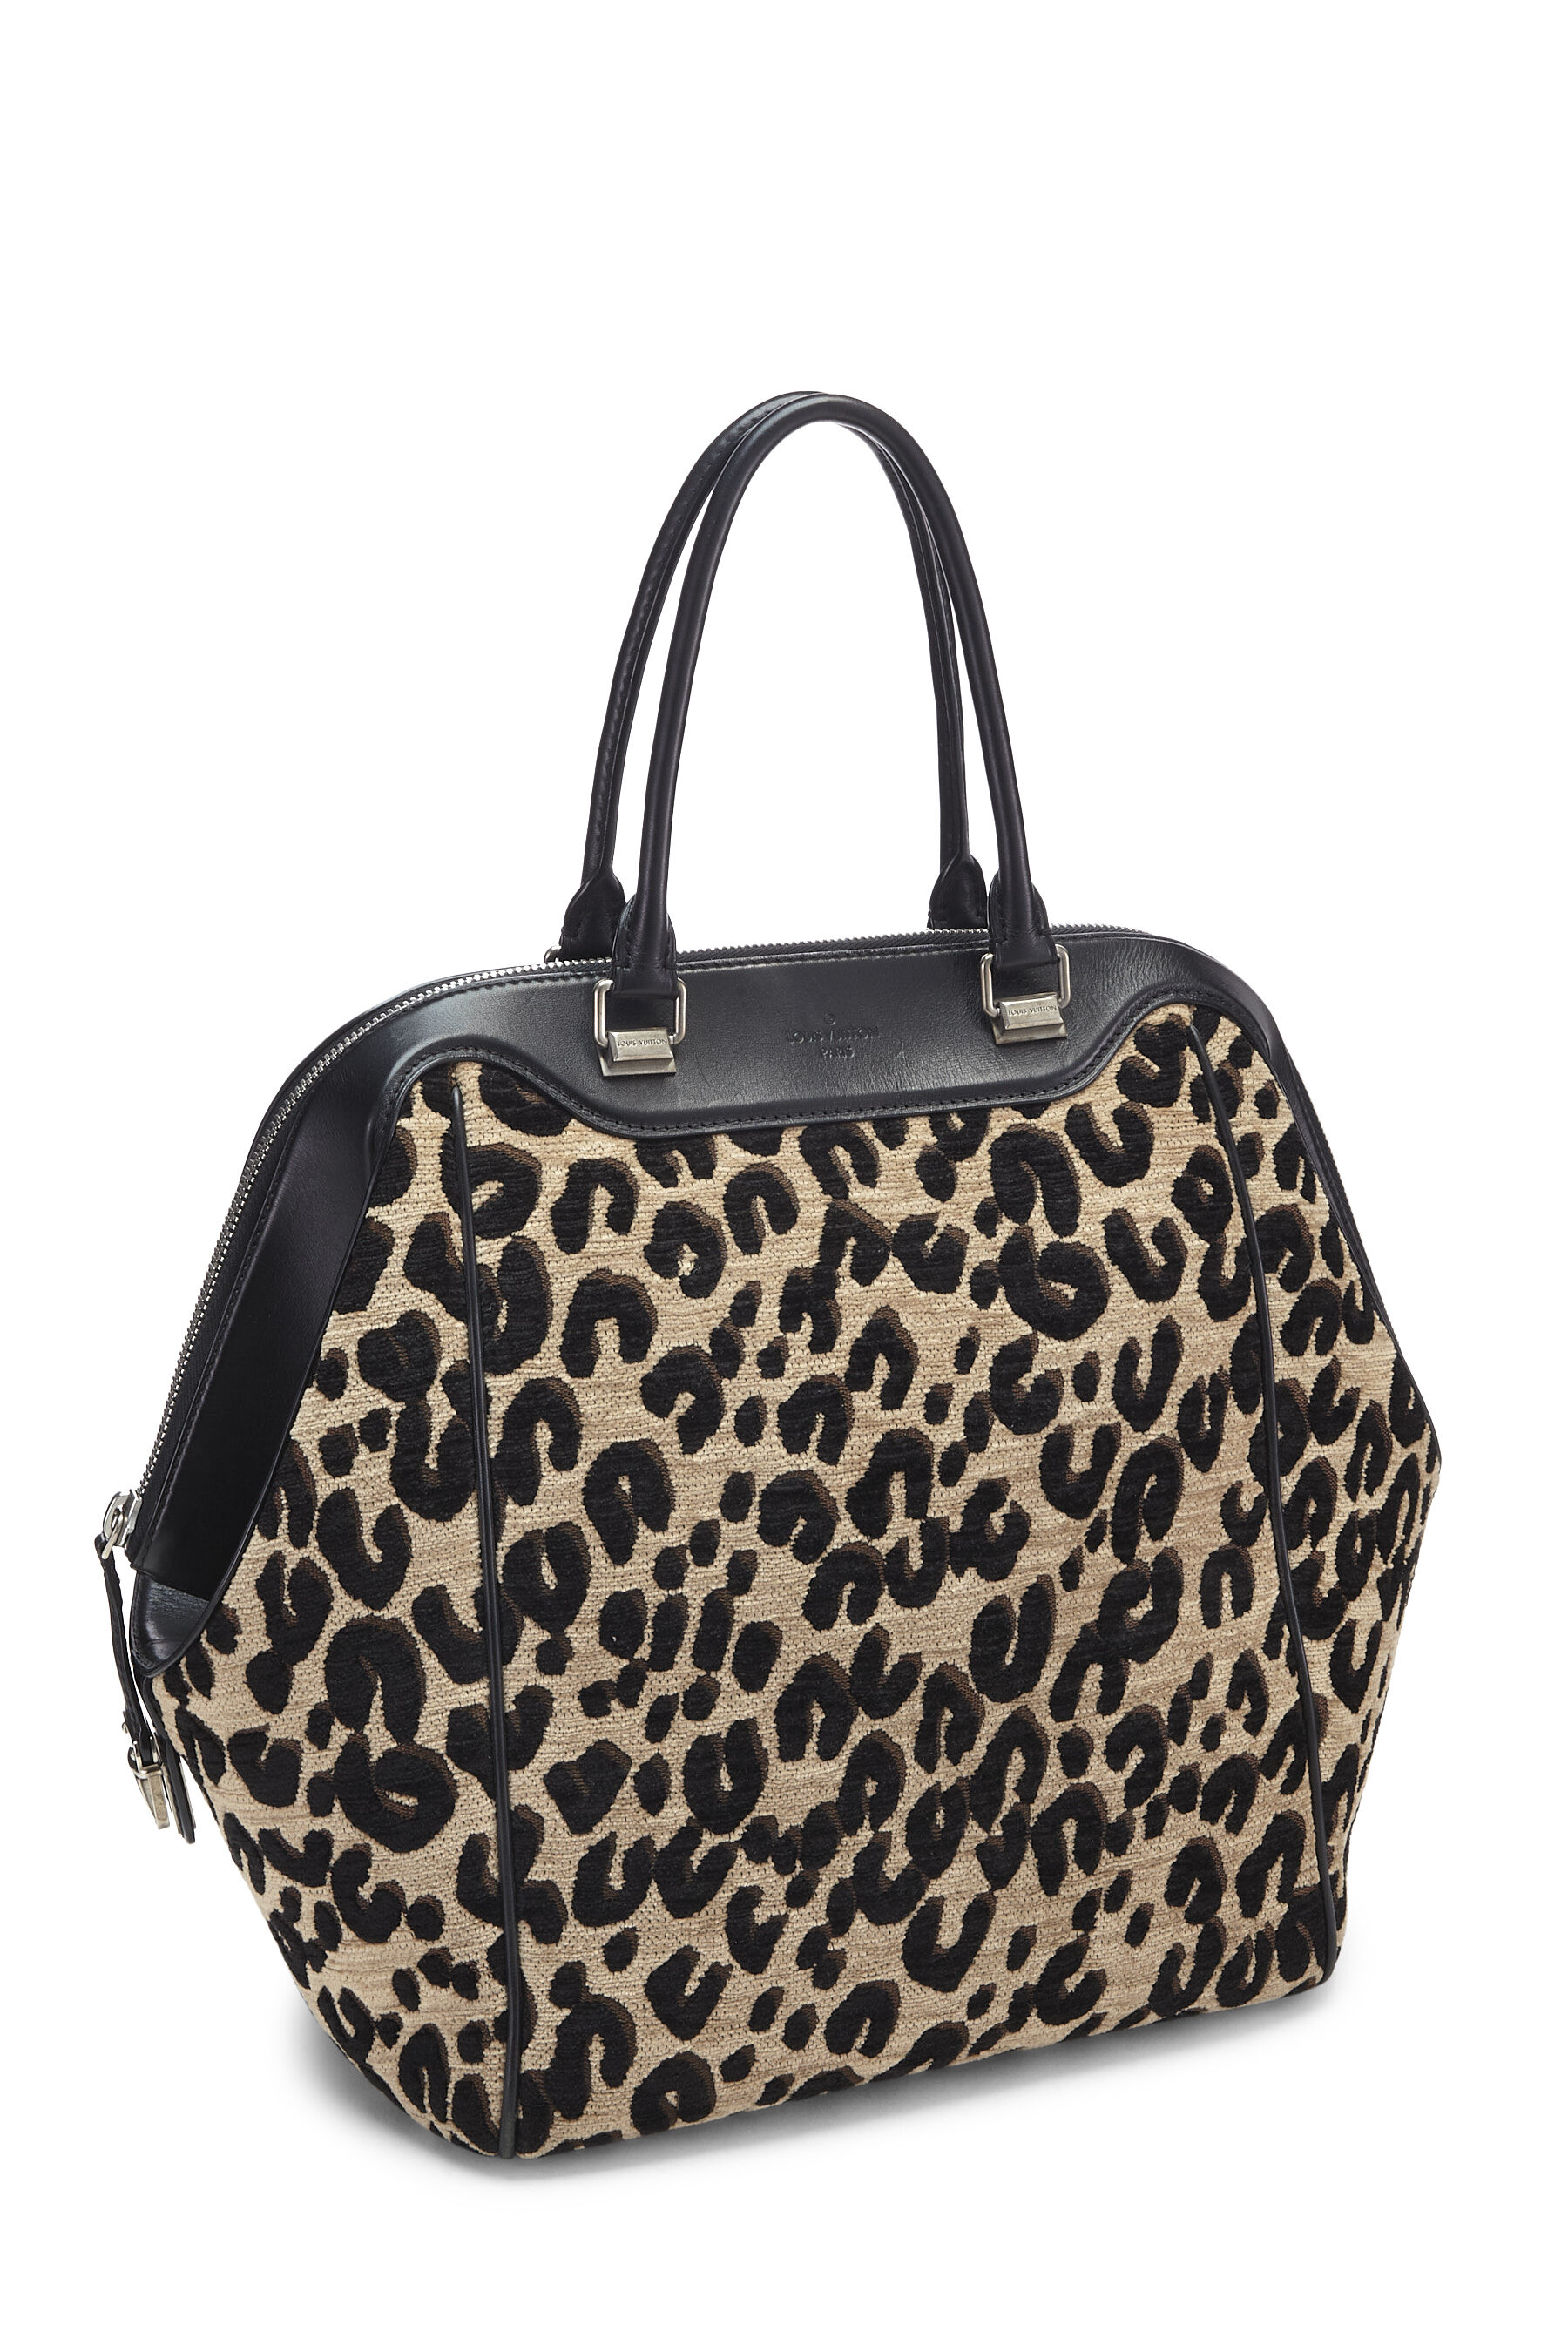 Louis Vuitton - Tan & Black Leopard Chenille Tapestry North-South Tote